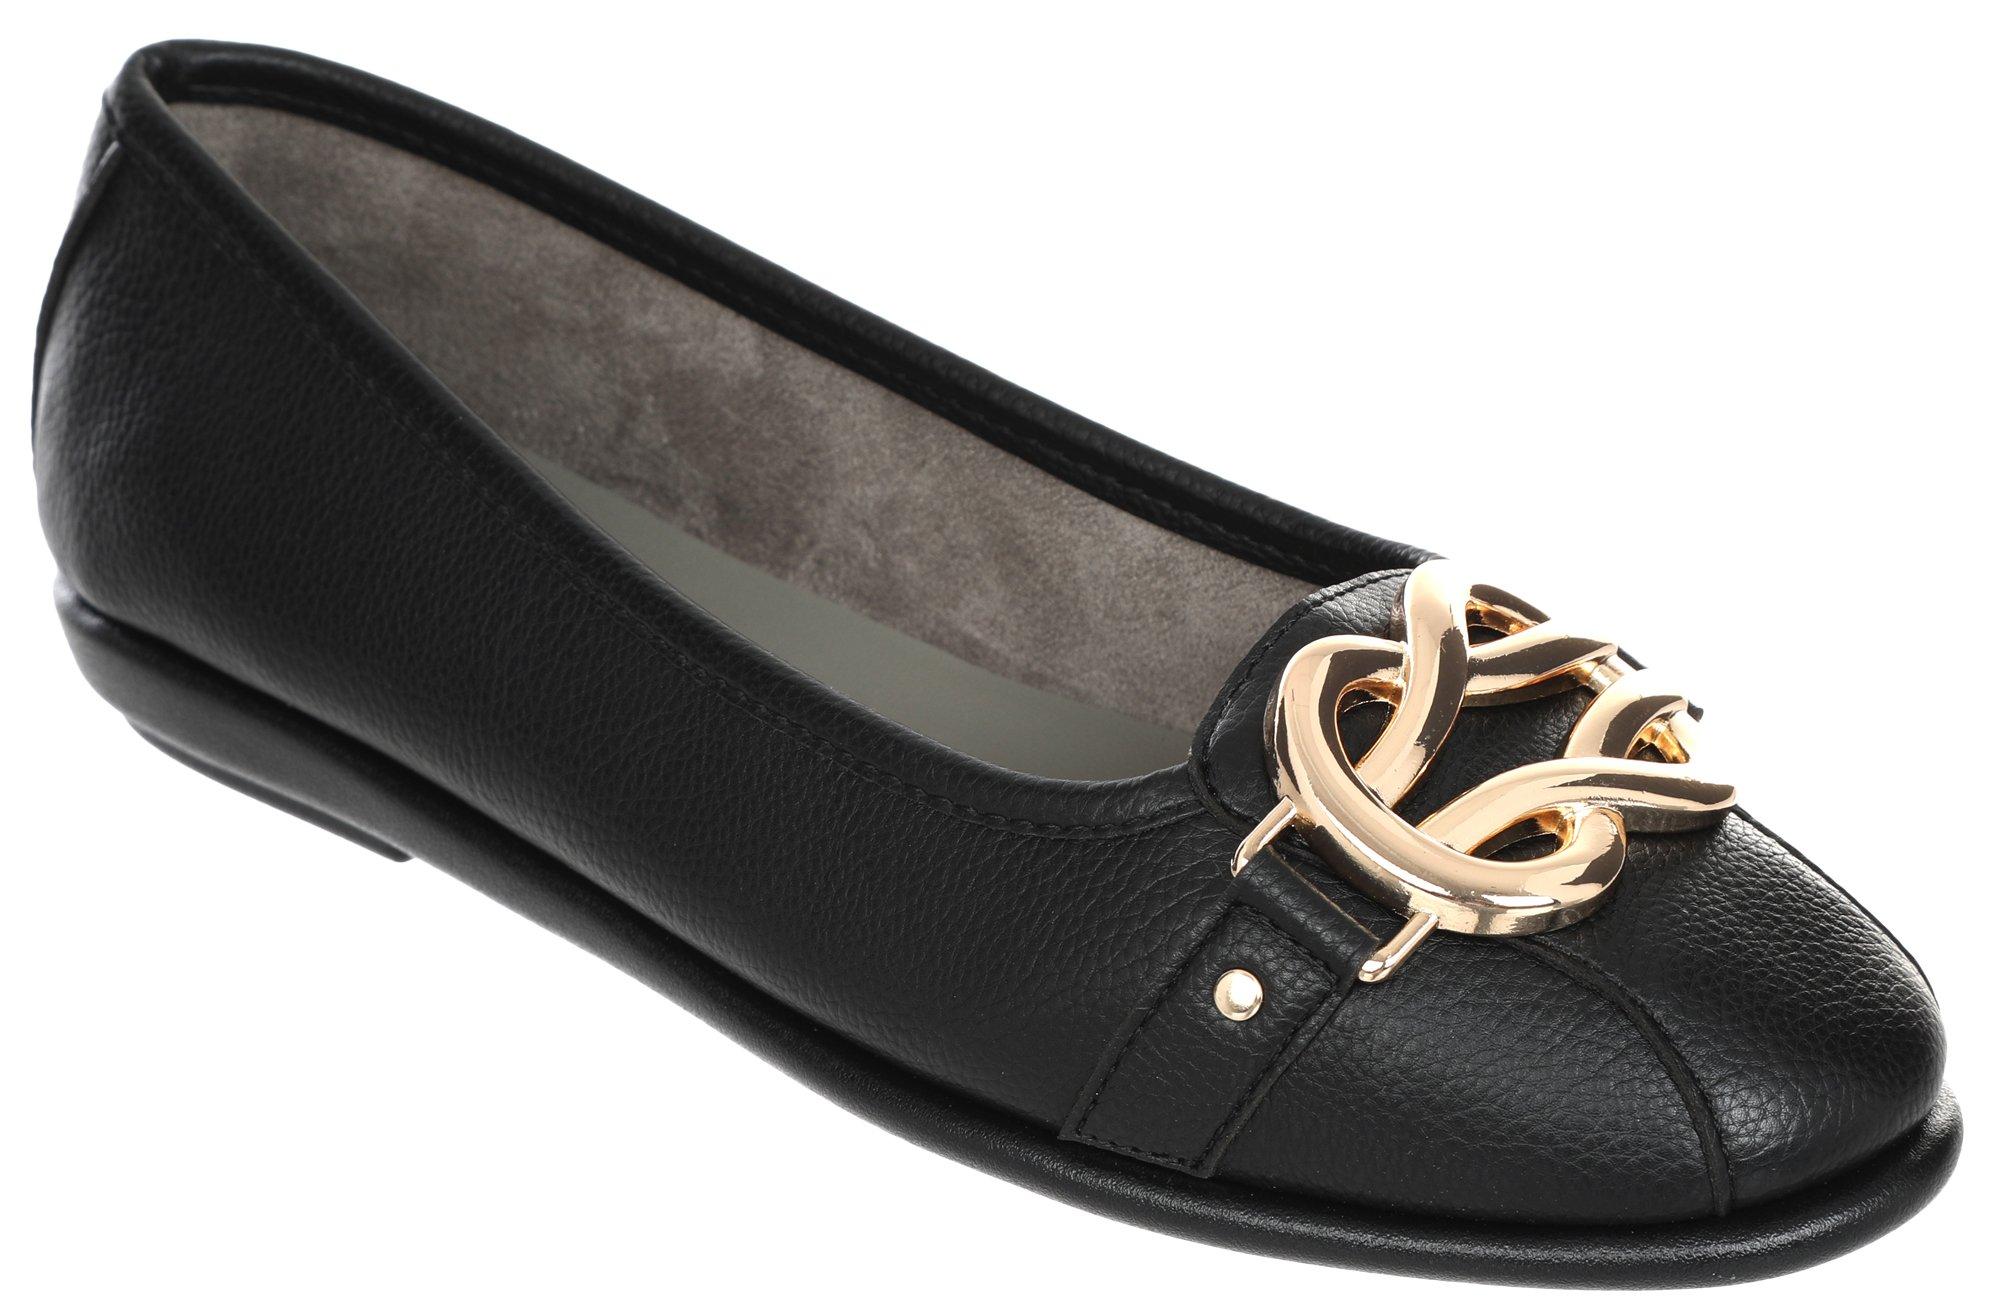 Women's Solid Fax Leather Flats - Black